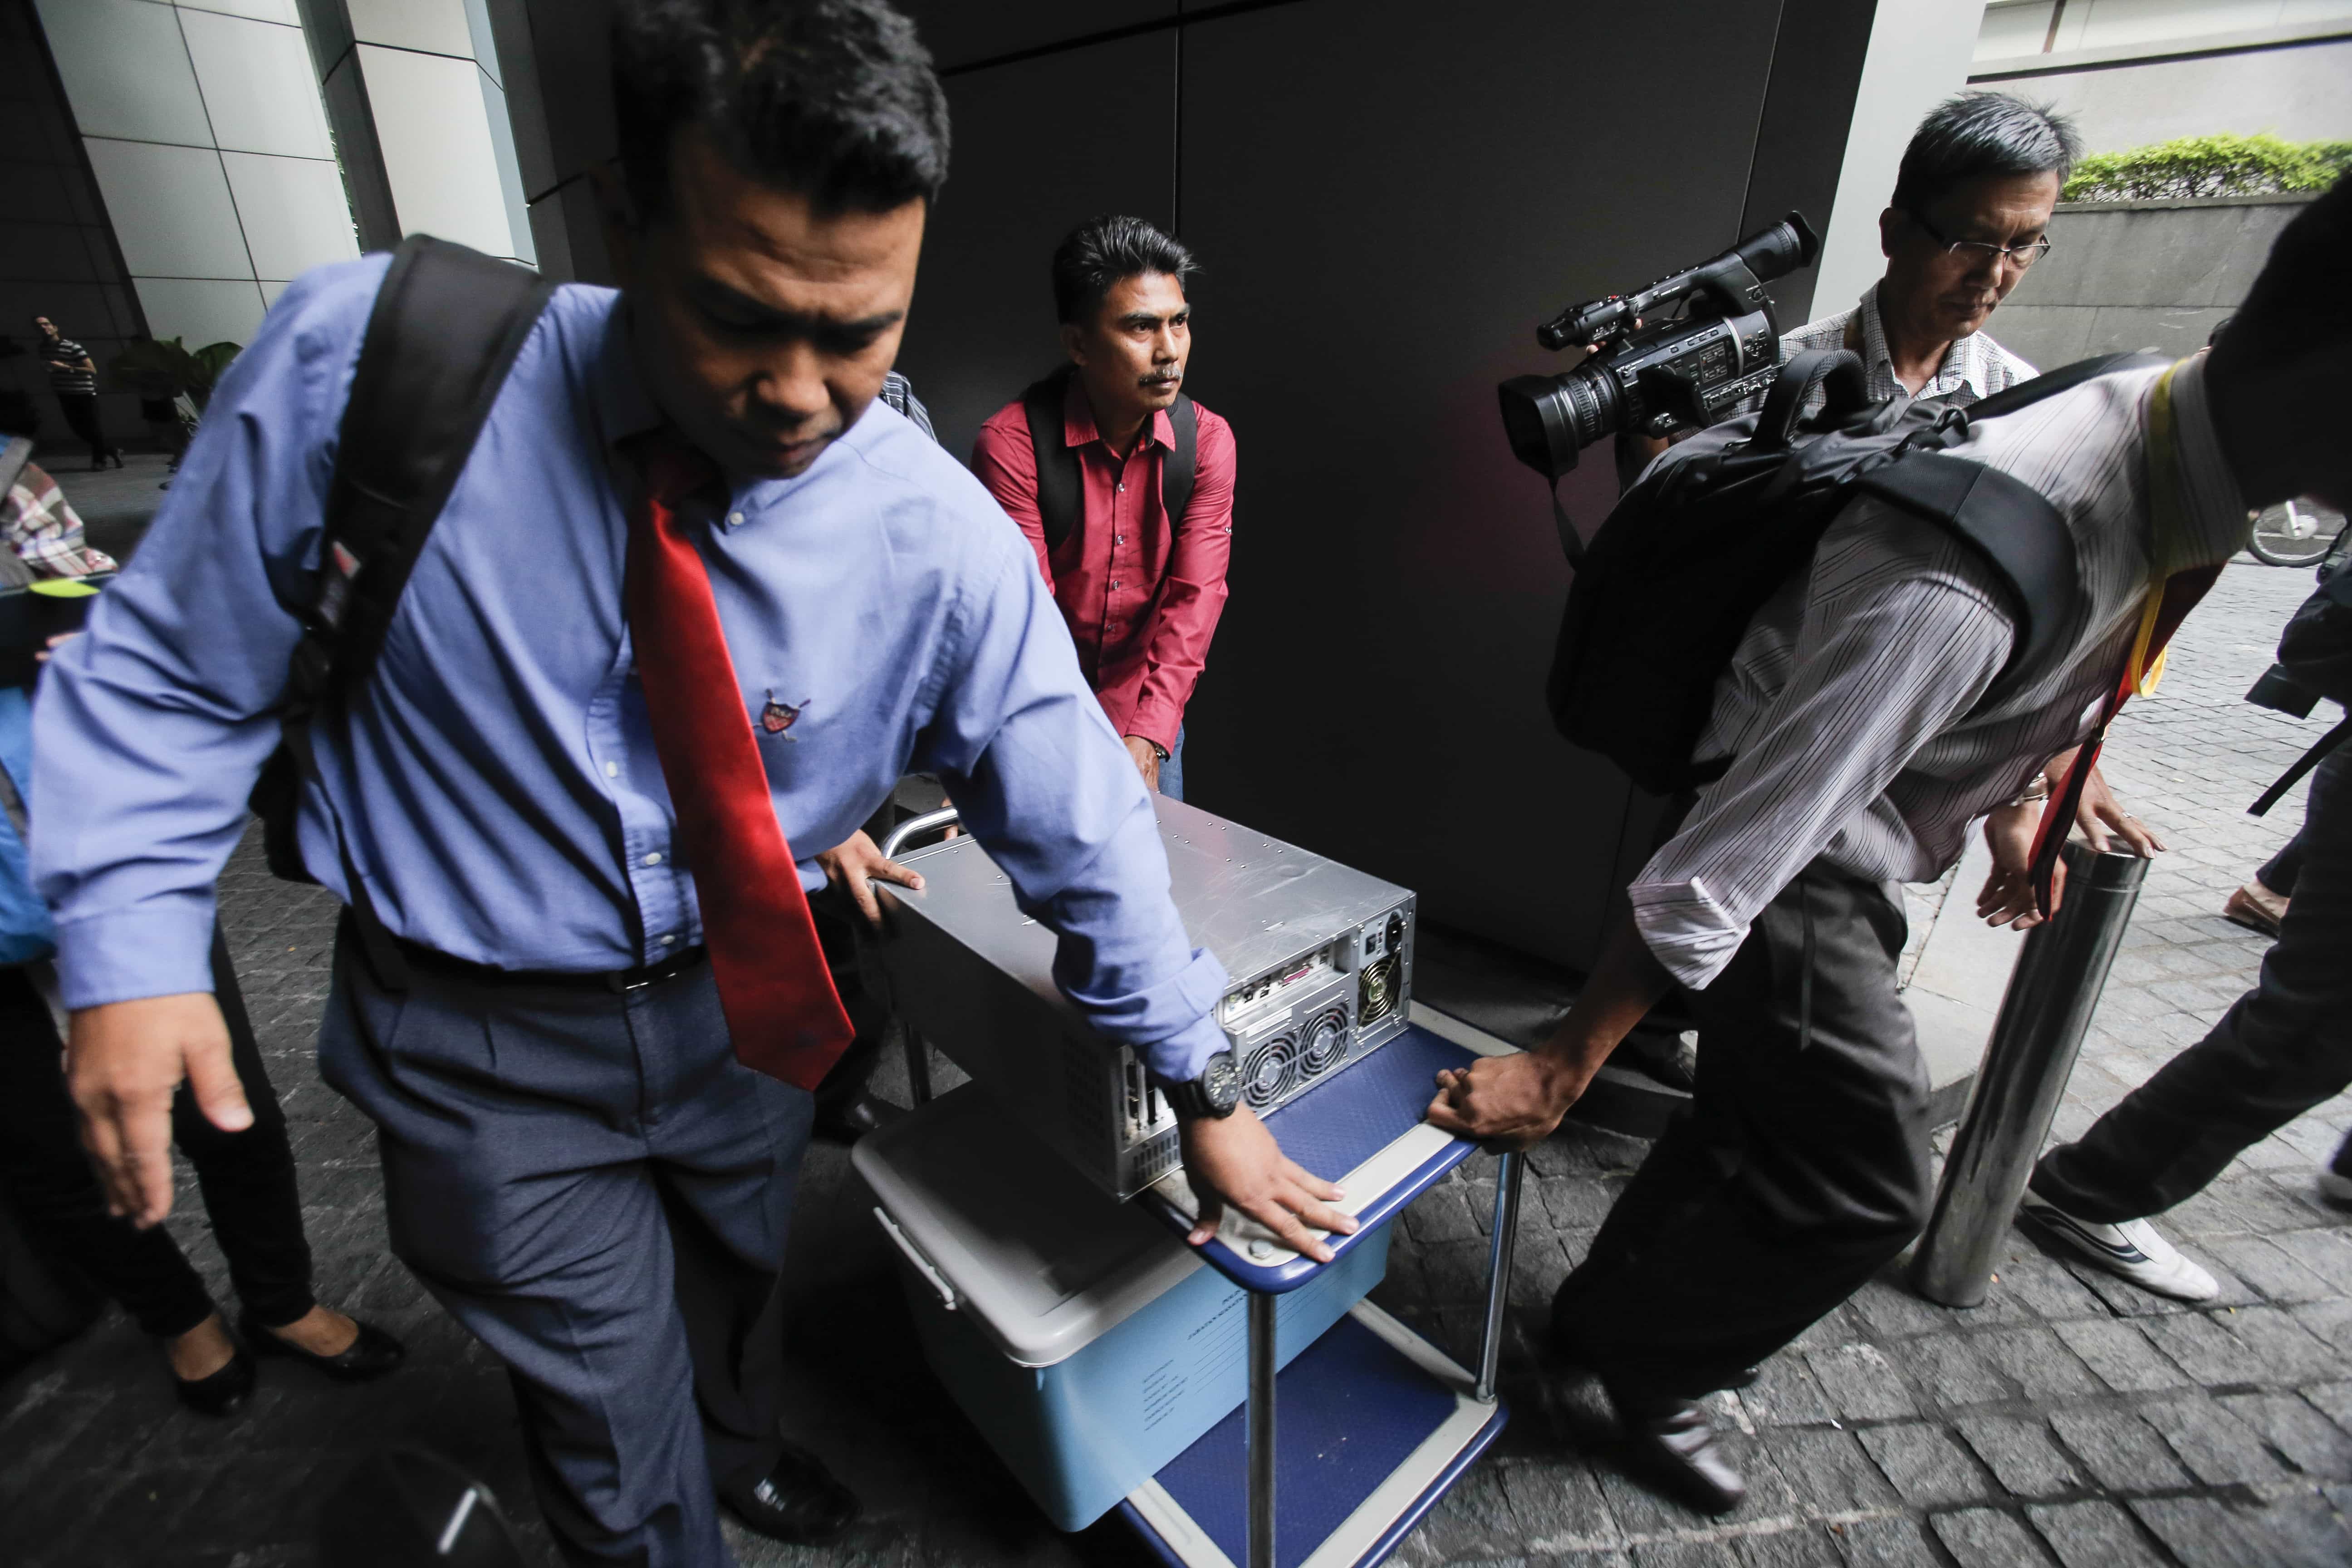 Malaysian plainclothes police carry a computer from the 1MDB office after a raid in Kuala Lumpur, 8 July 2015. Six bank accounts were frozen as part of an investigation into allegations that funds were transferred from a state investment fund to the personal accounts of PM Najib, AP Photo/Joshua Paul